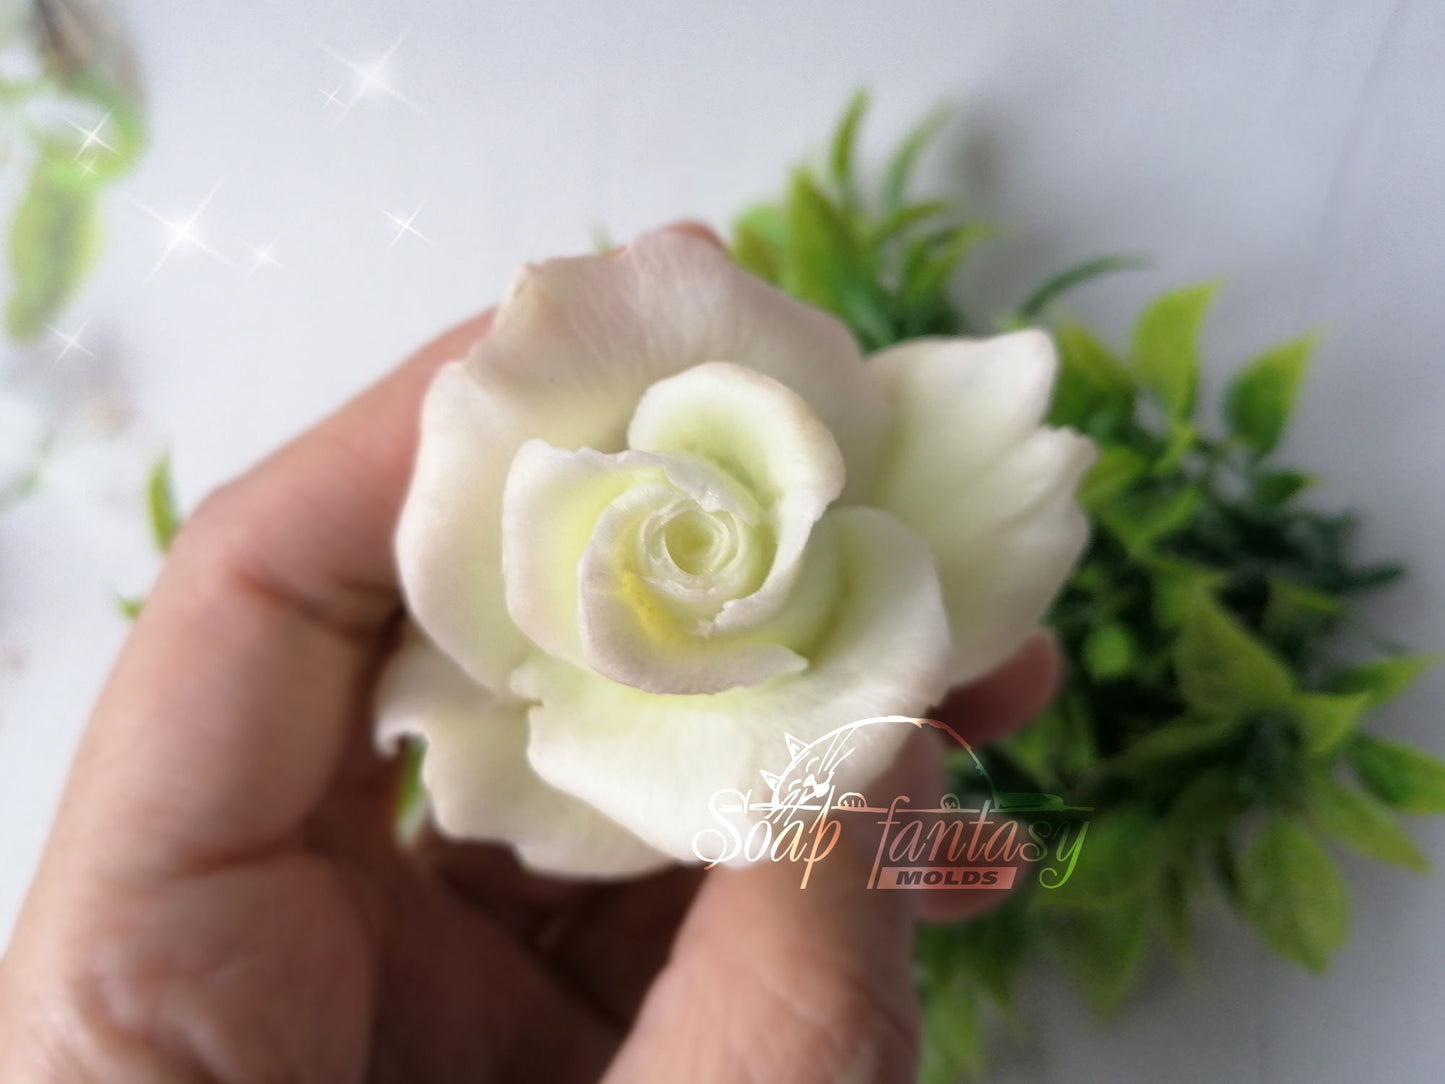 Rose "Delicate" silicone mold for soap making